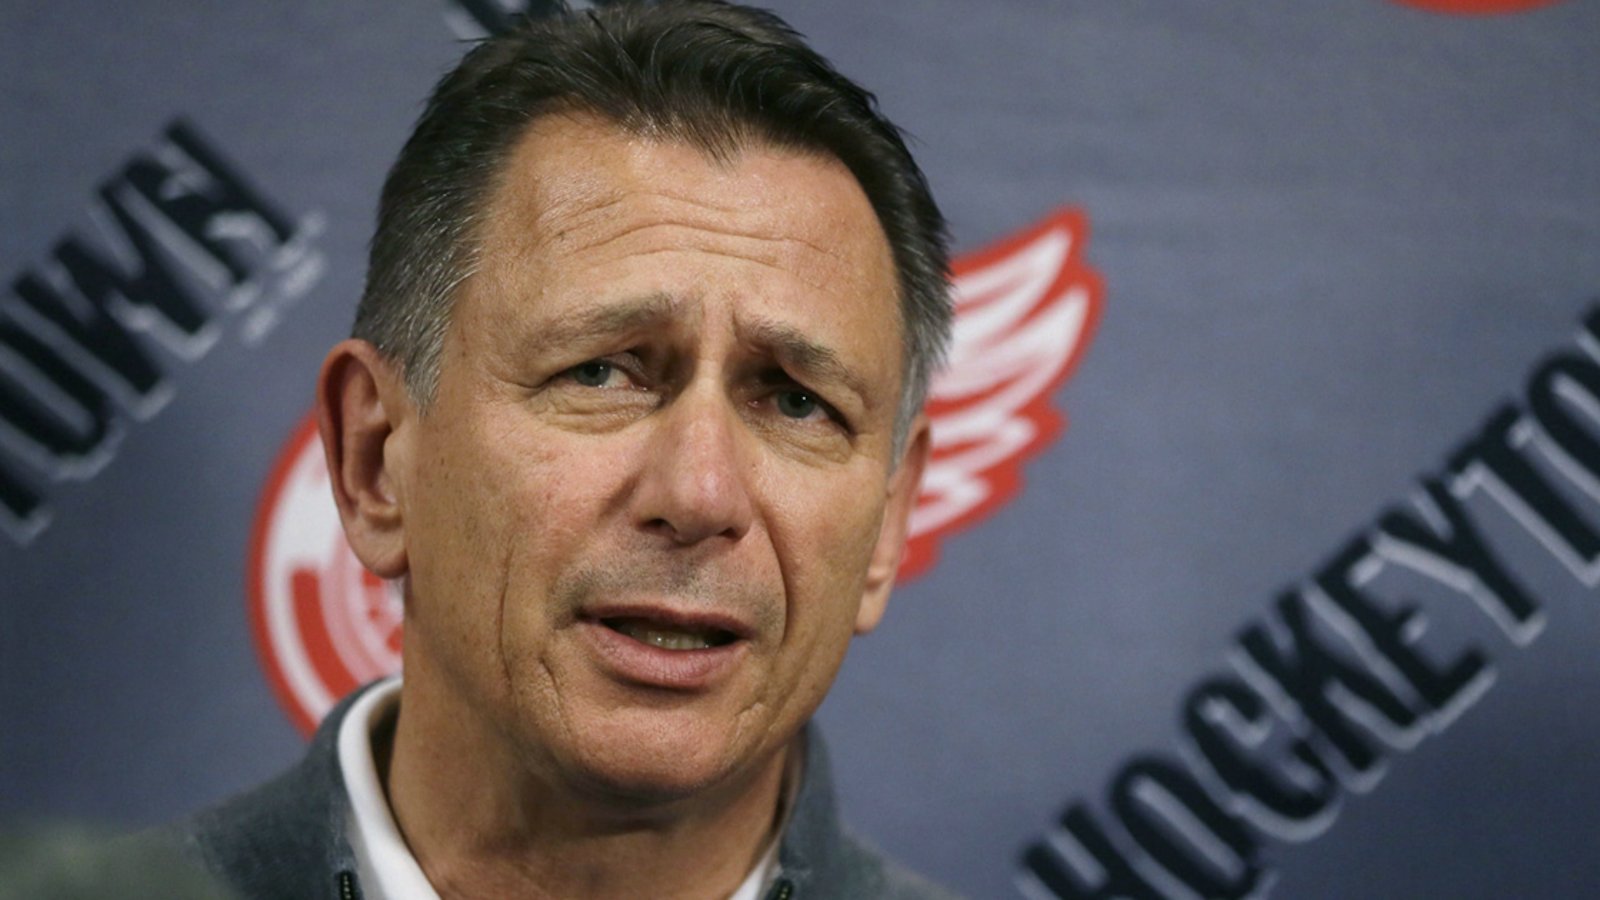 Your Call: Should the Wings fire Ken Holland?